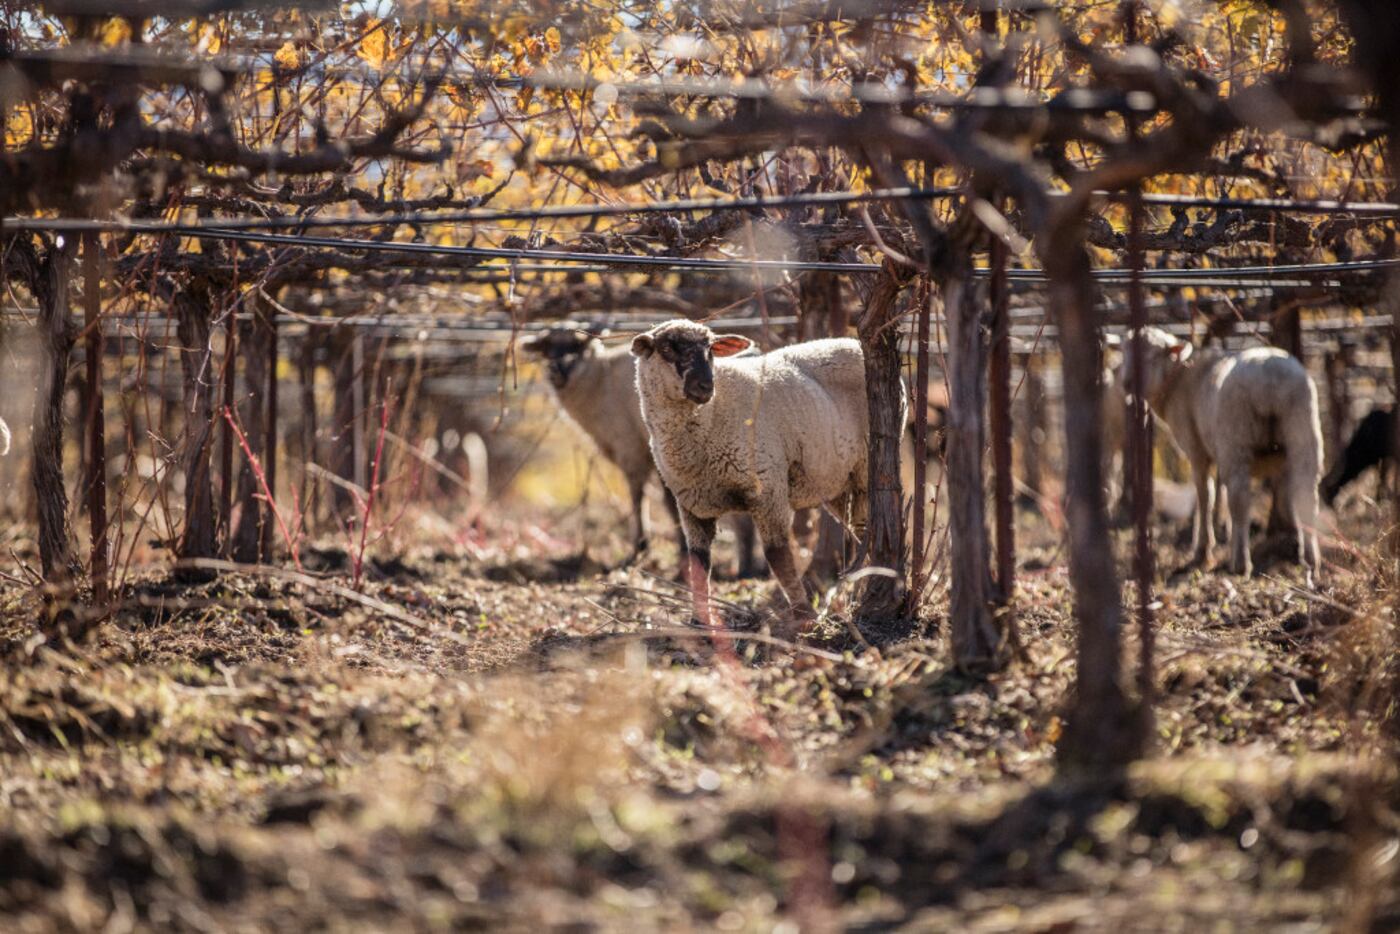 About 3,000 sheep graze on the vineyards at Bonterra, helping encourage biodiversity in the...